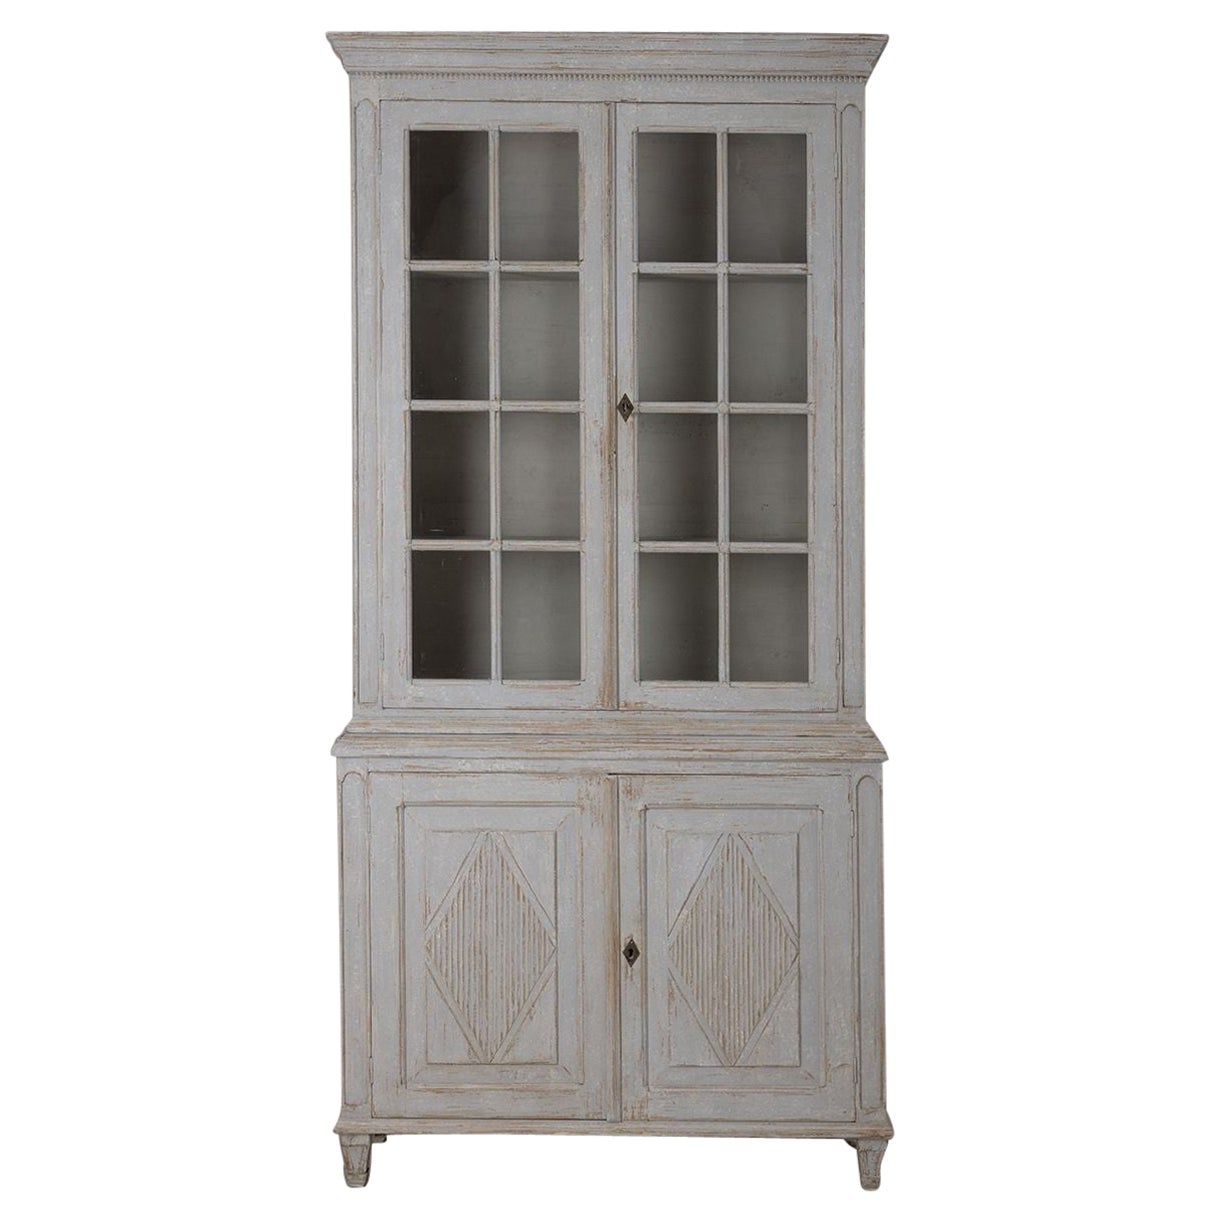 A beautiful two-part late Gustavian vitrine with original glass. Beaded molding wraps around the upper crown with 3 fixed uppper shelves and the lower doors have reeded lozenges and an interior shelf, all raised on tapered and fluted legs.